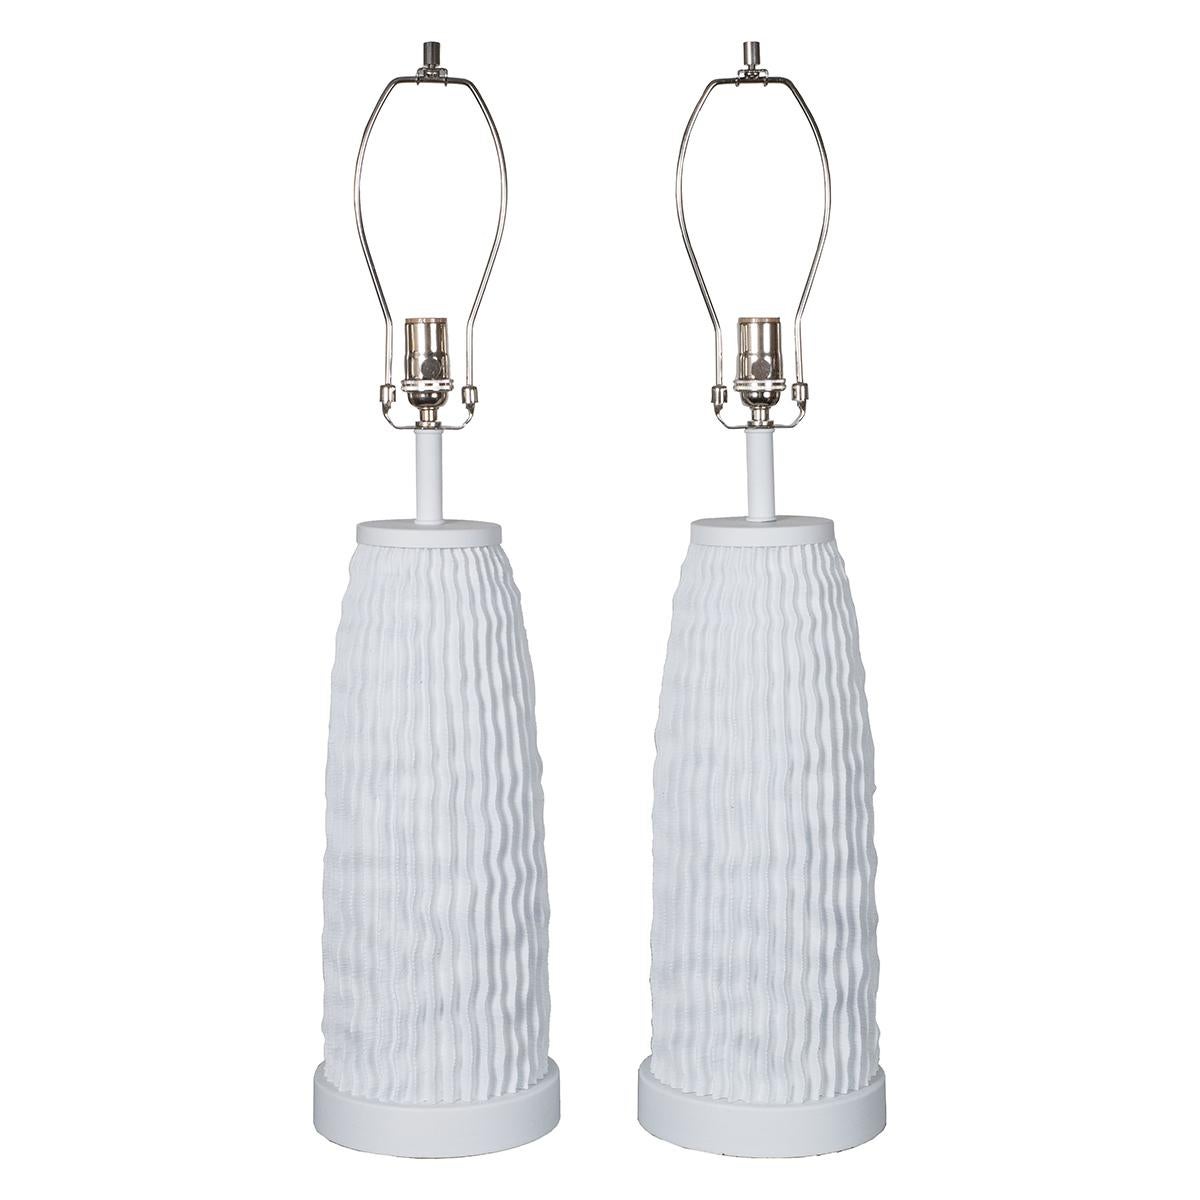 Pair of white organic, ridged composition table lamps.